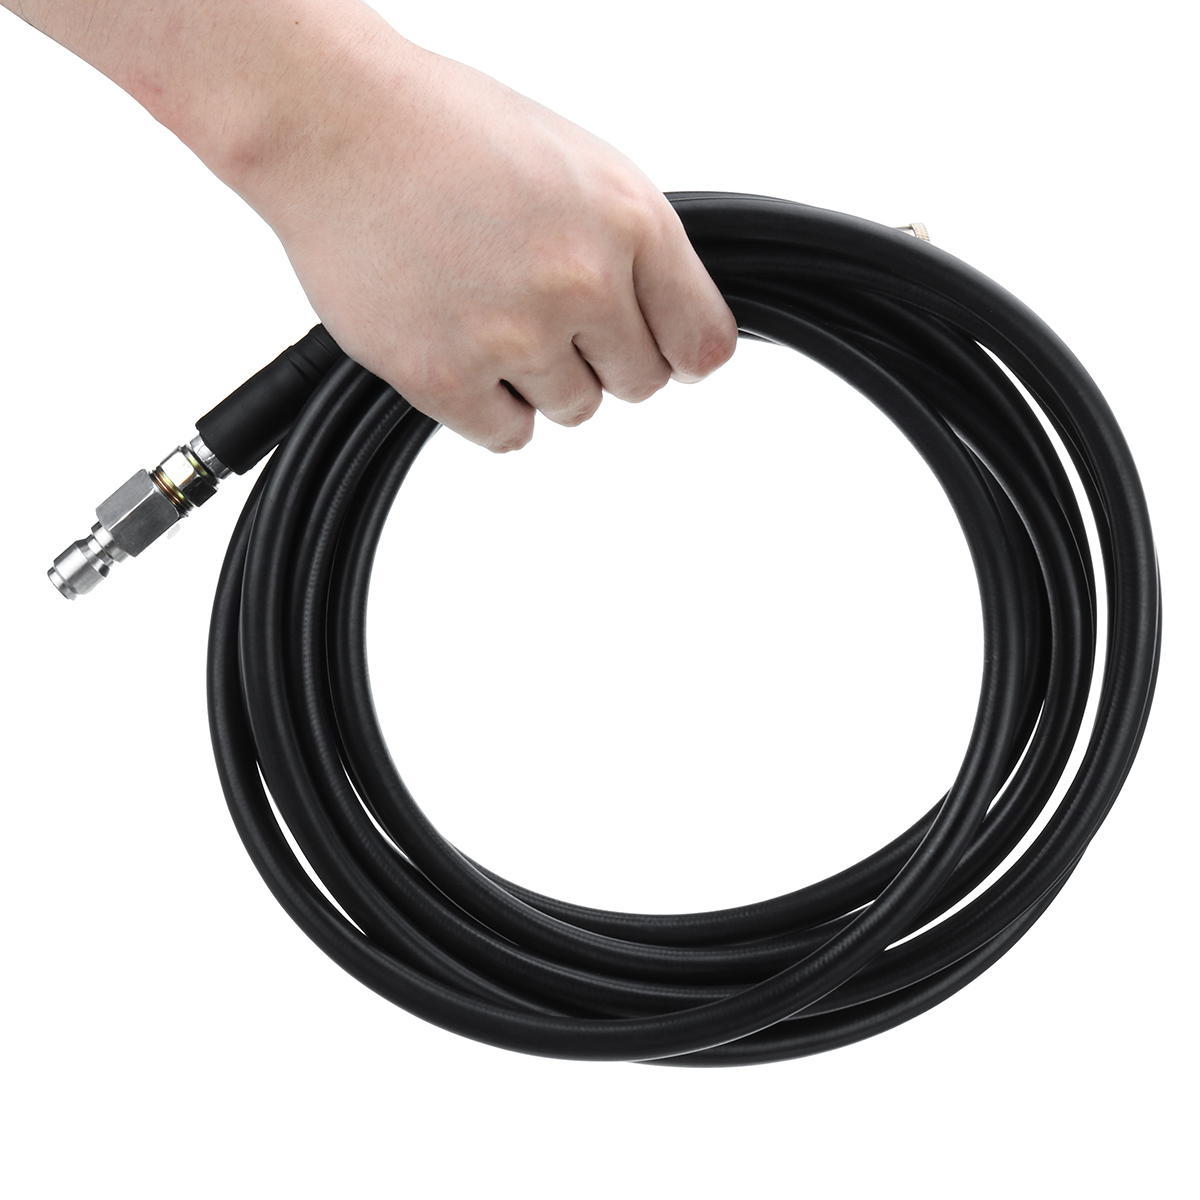 5M-5800PSI-High-Pressure-Washer-Hose-Pipe-Drain-Sewer-Cleaning-Hose-for-Car-Garden-Water-Washer-1558770-5